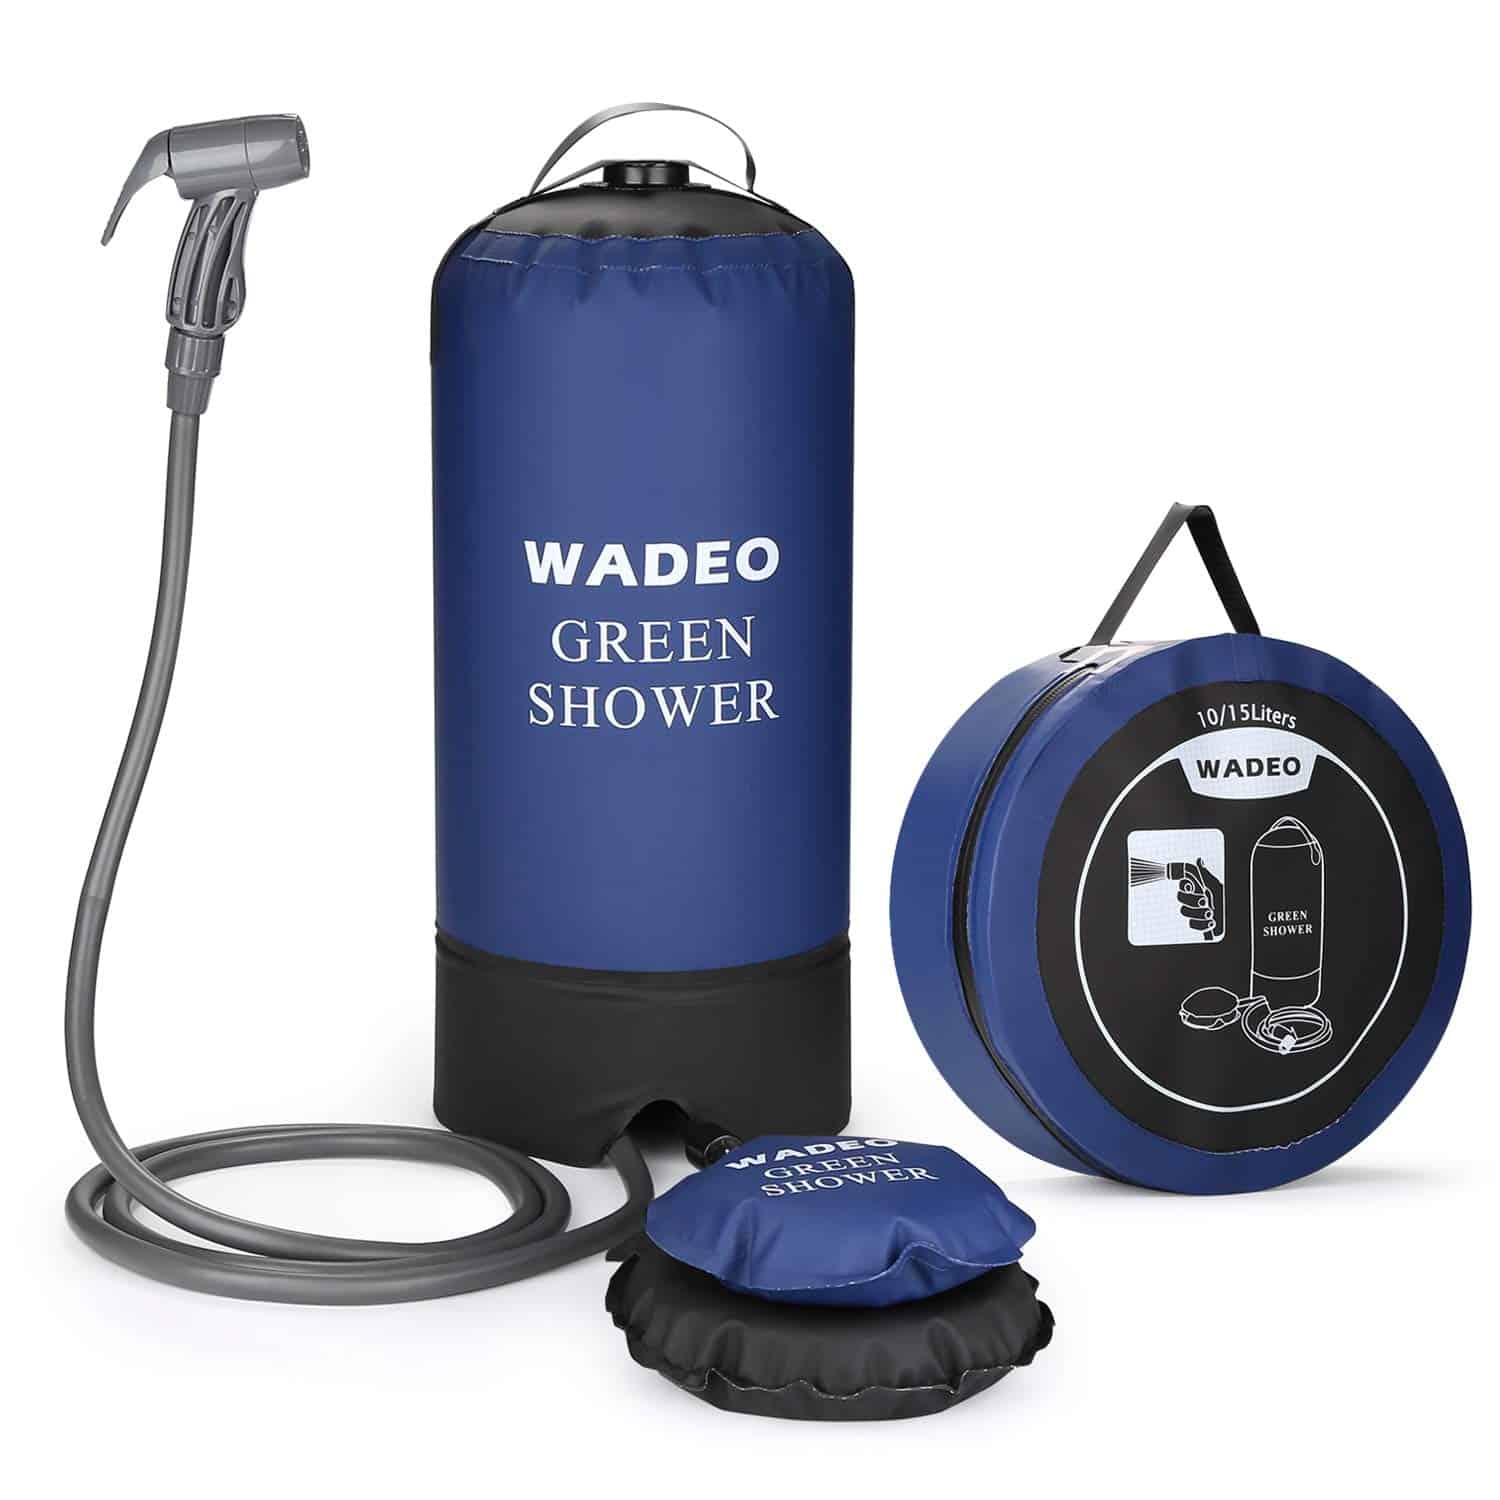 Wadeo camp shower